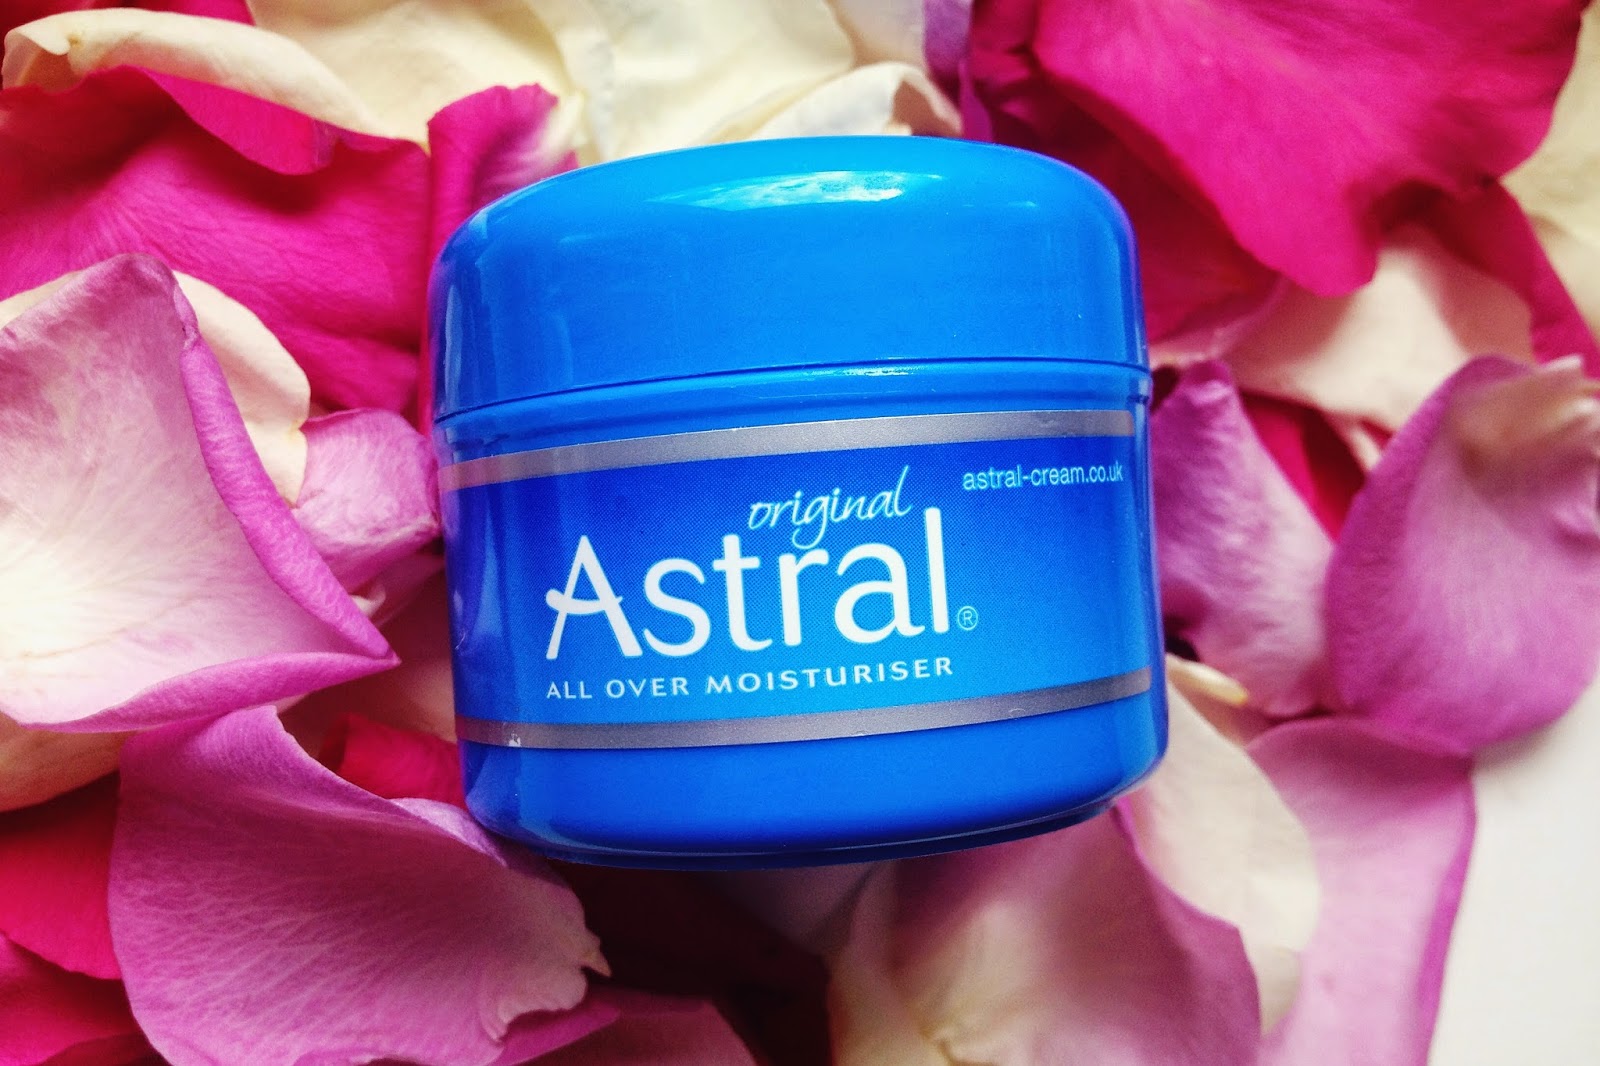 Astral cream review, beauty blog